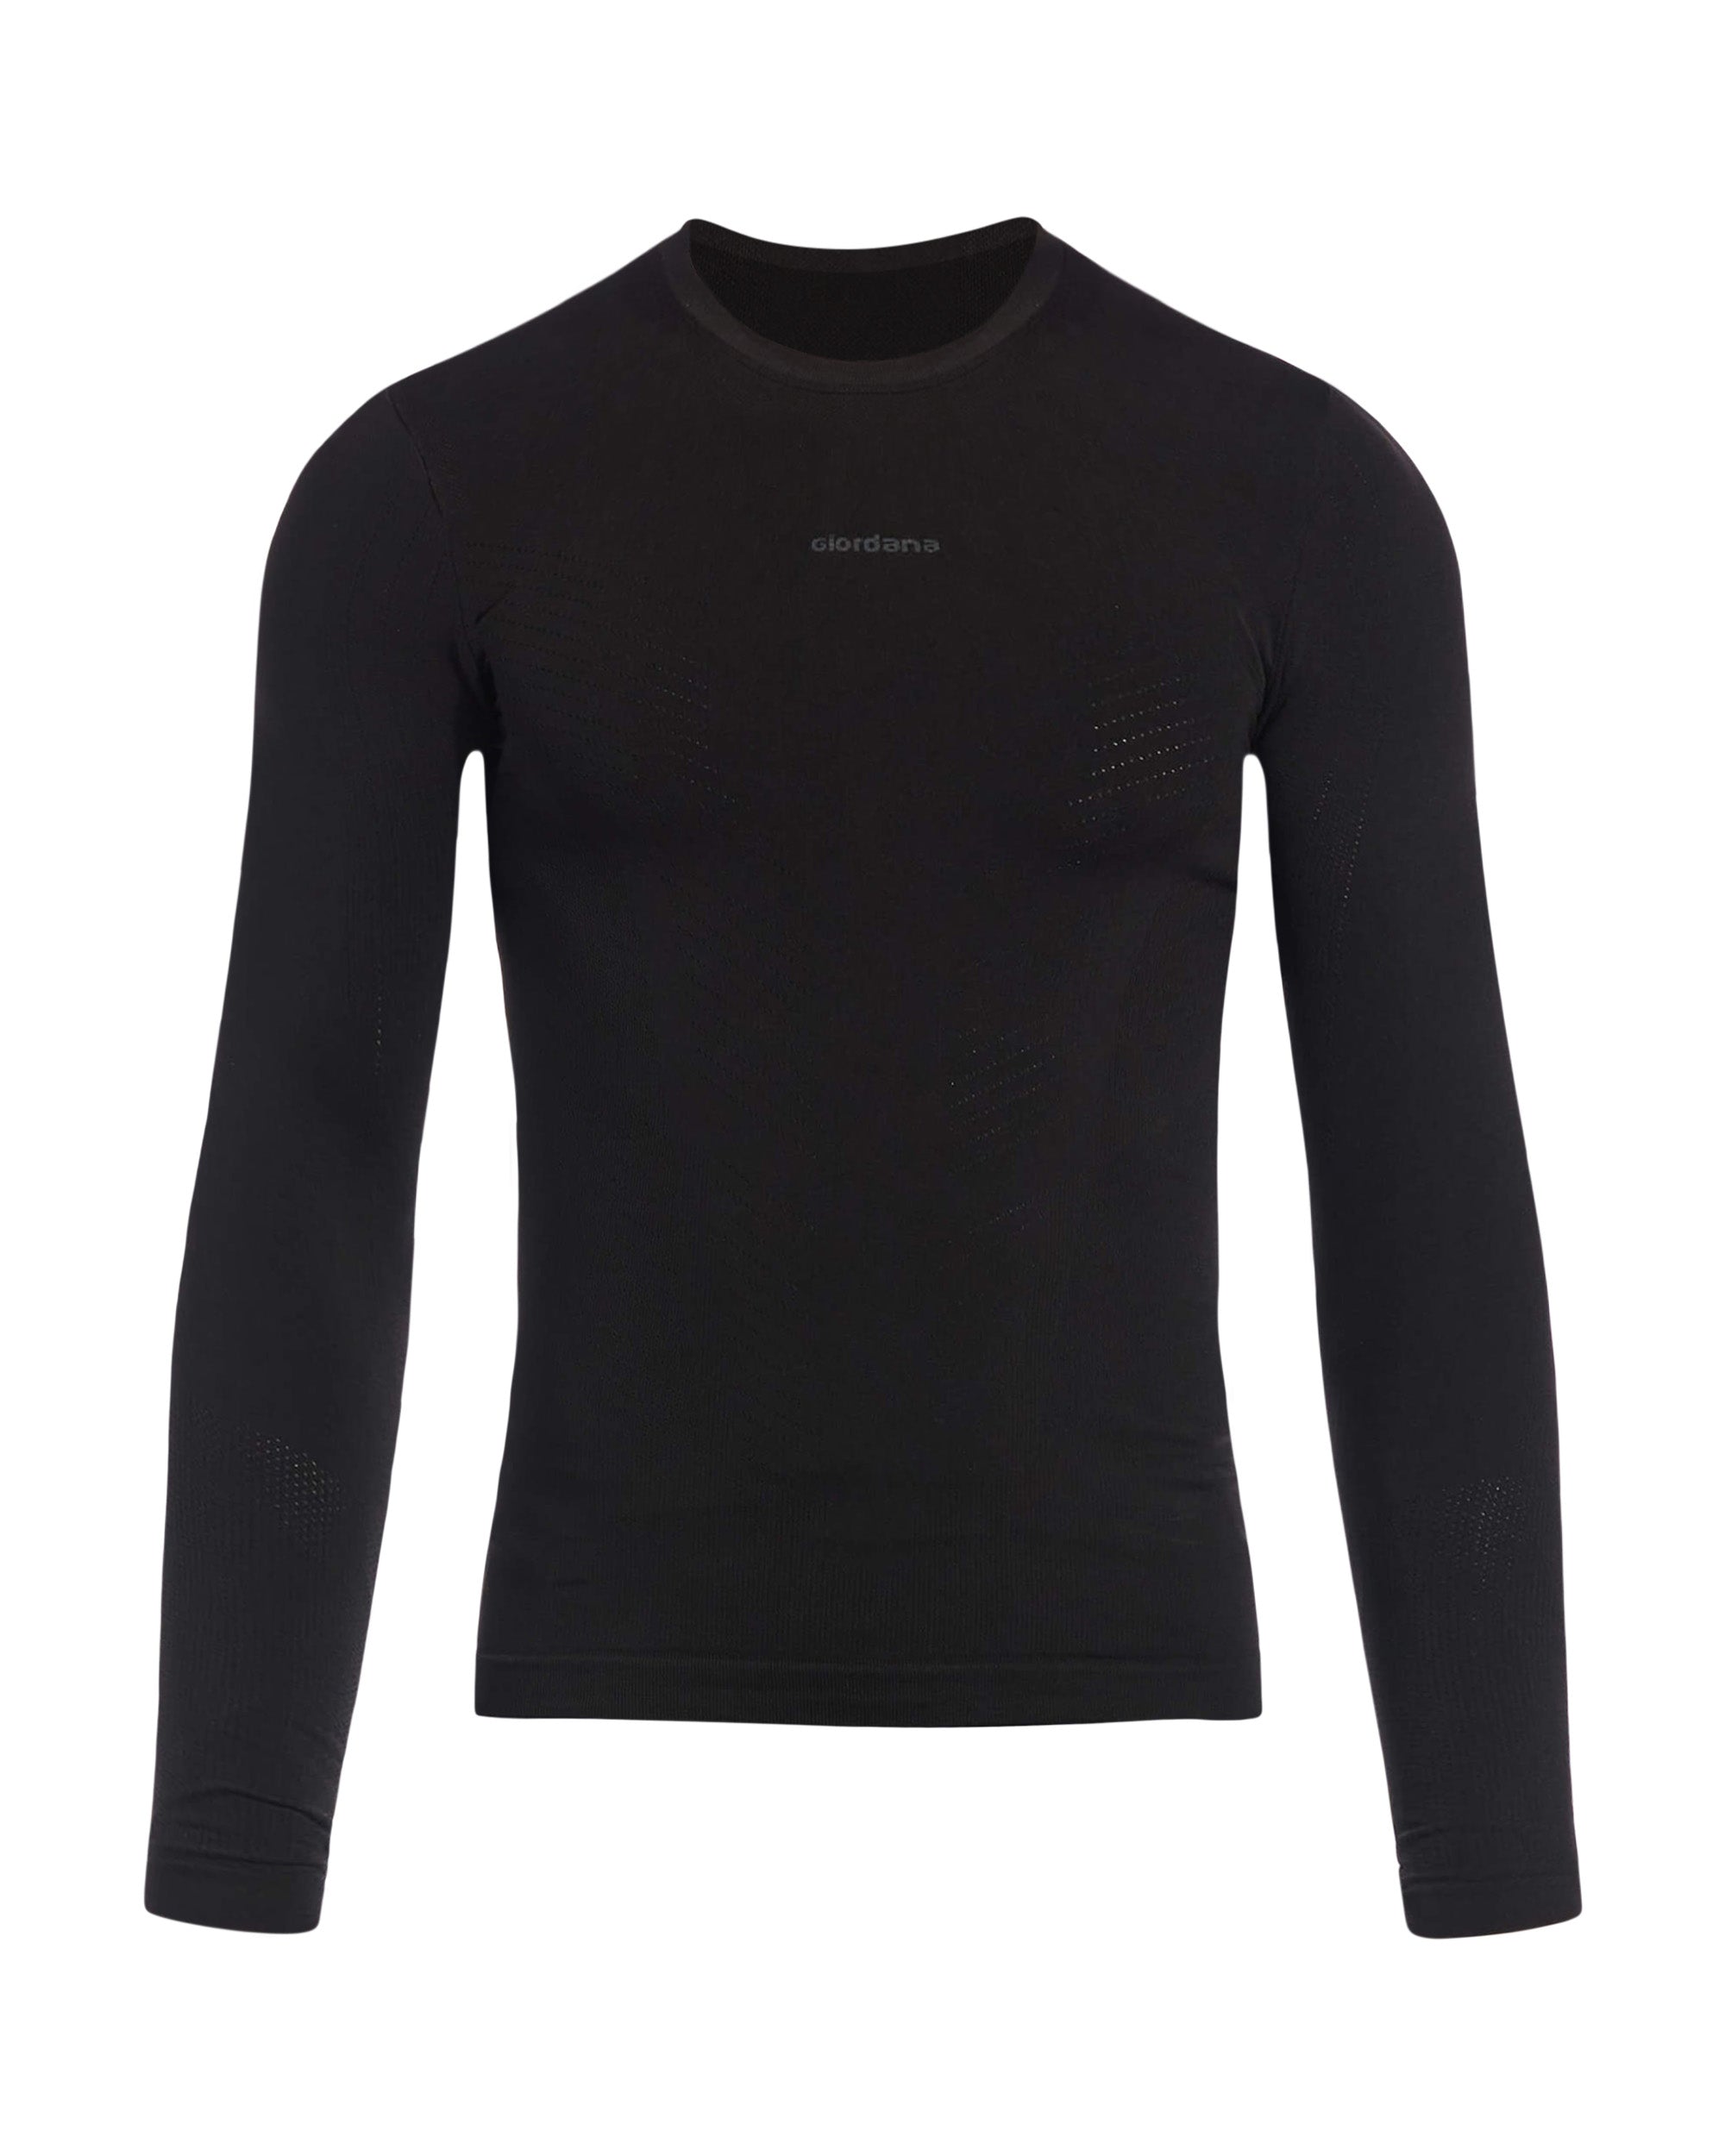 Midweight Knitted Long Sleeve Base Layer